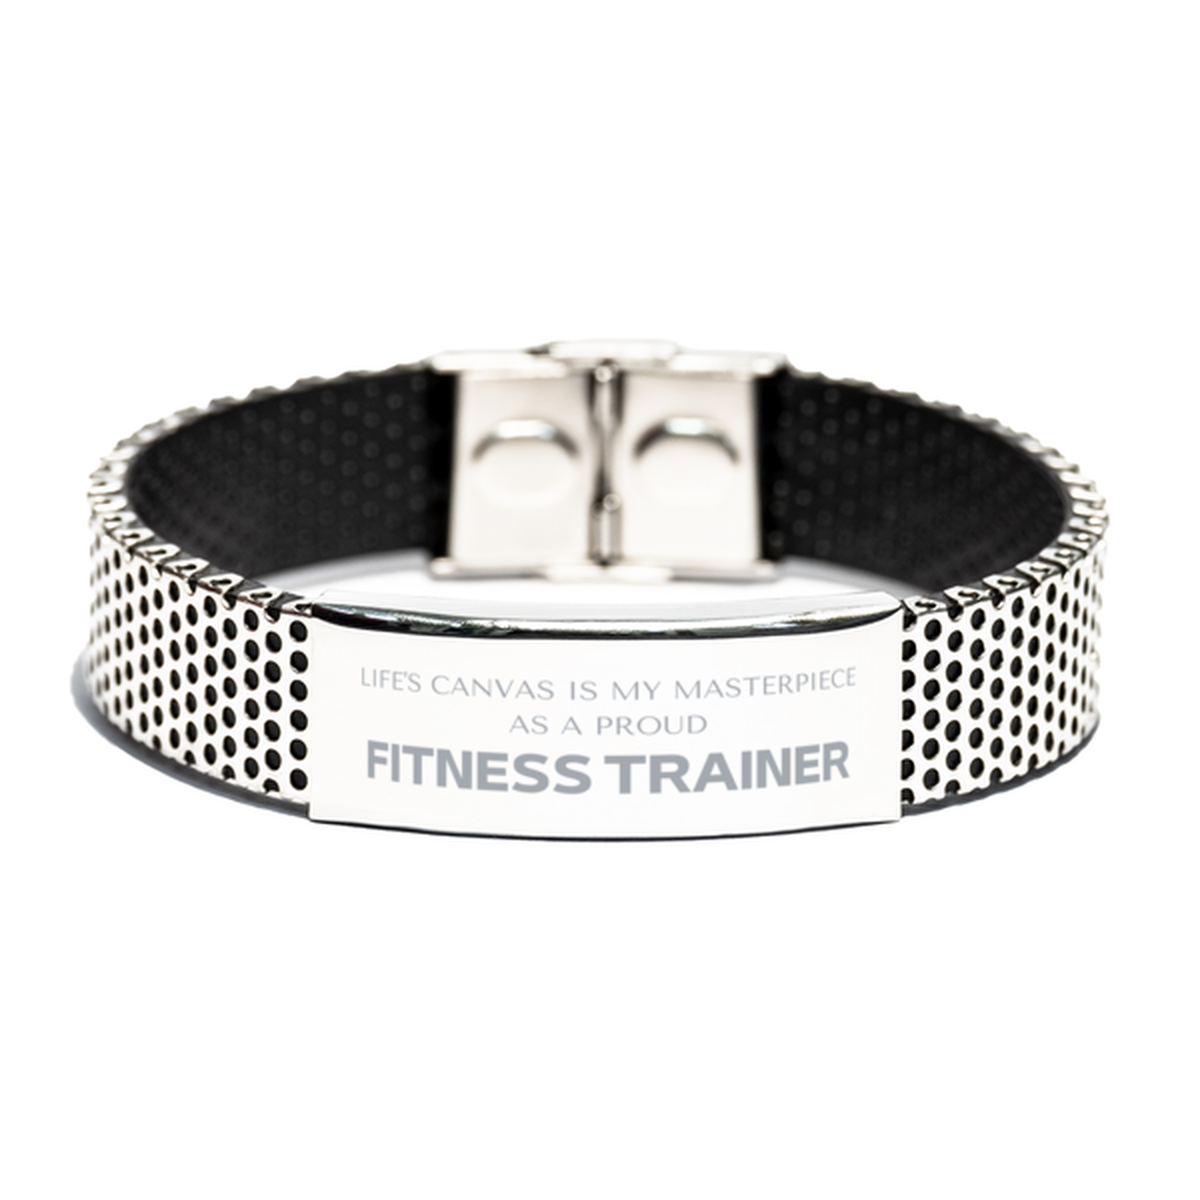 Proud Fitness Trainer Gifts, Life's canvas is my masterpiece, Epic Birthday Christmas Unique Stainless Steel Bracelet For Fitness Trainer, Coworkers, Men, Women, Friends